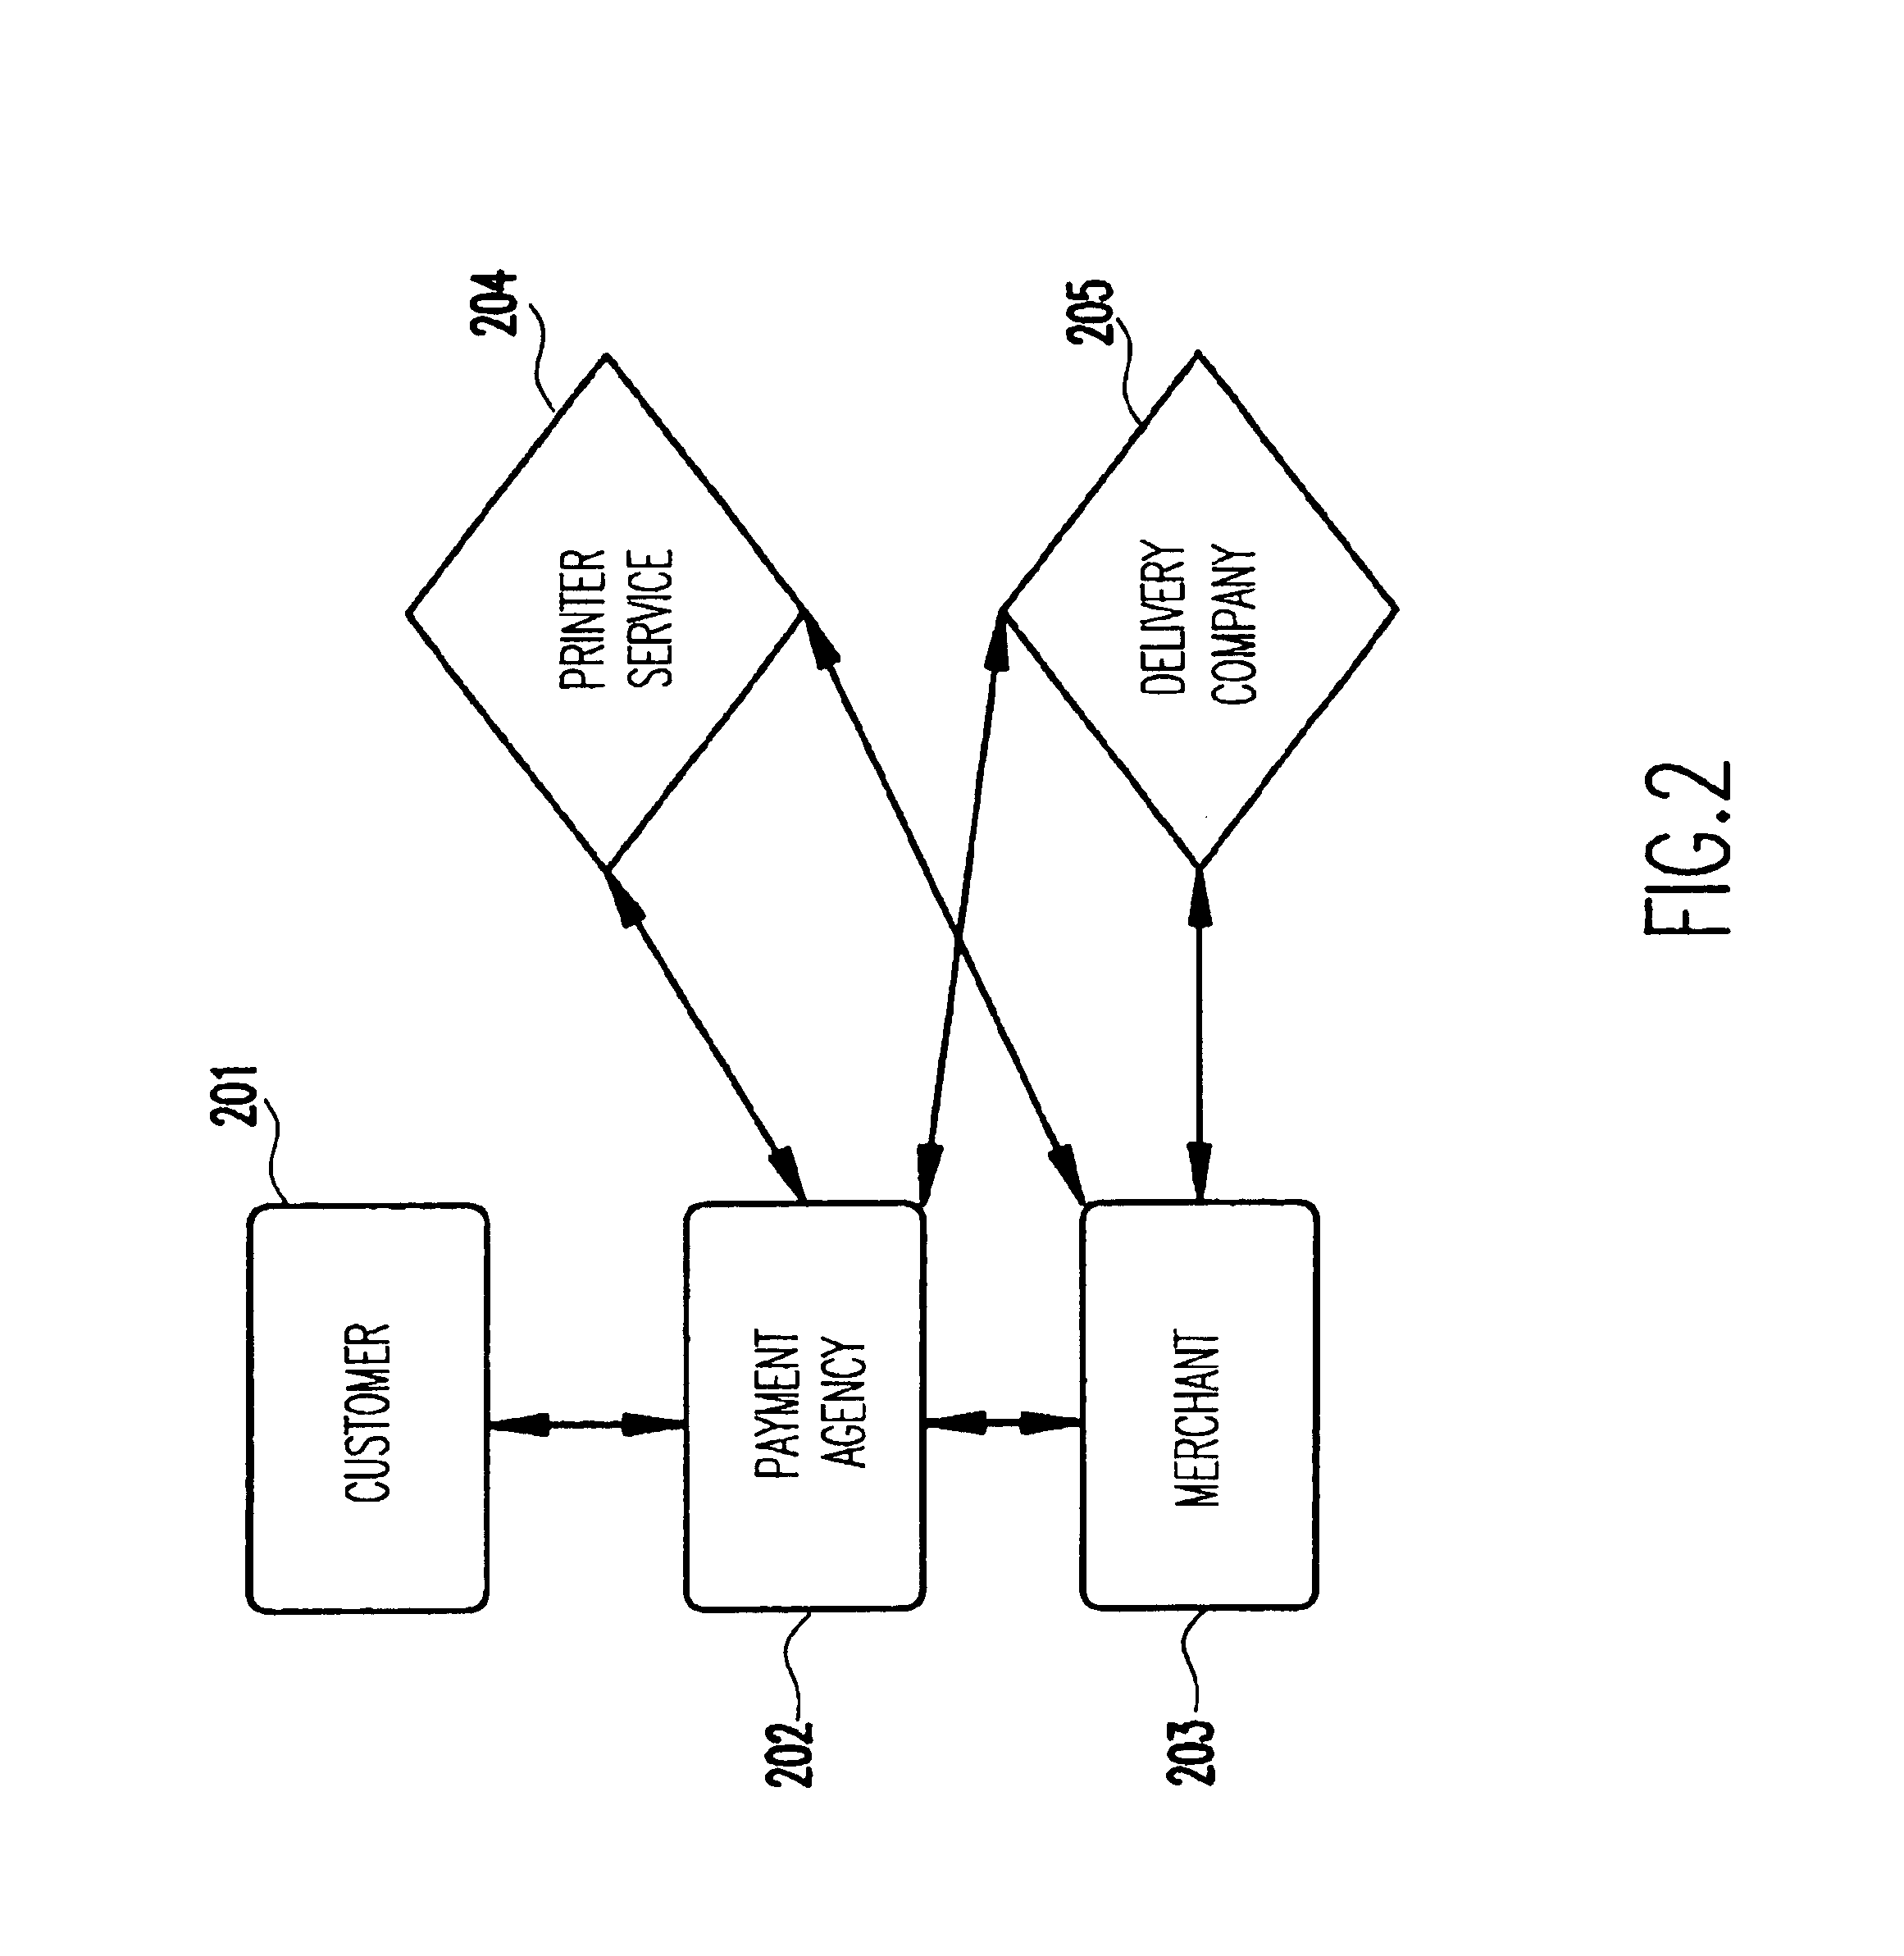 Method and apparatus for remote commerce with customer anonymity